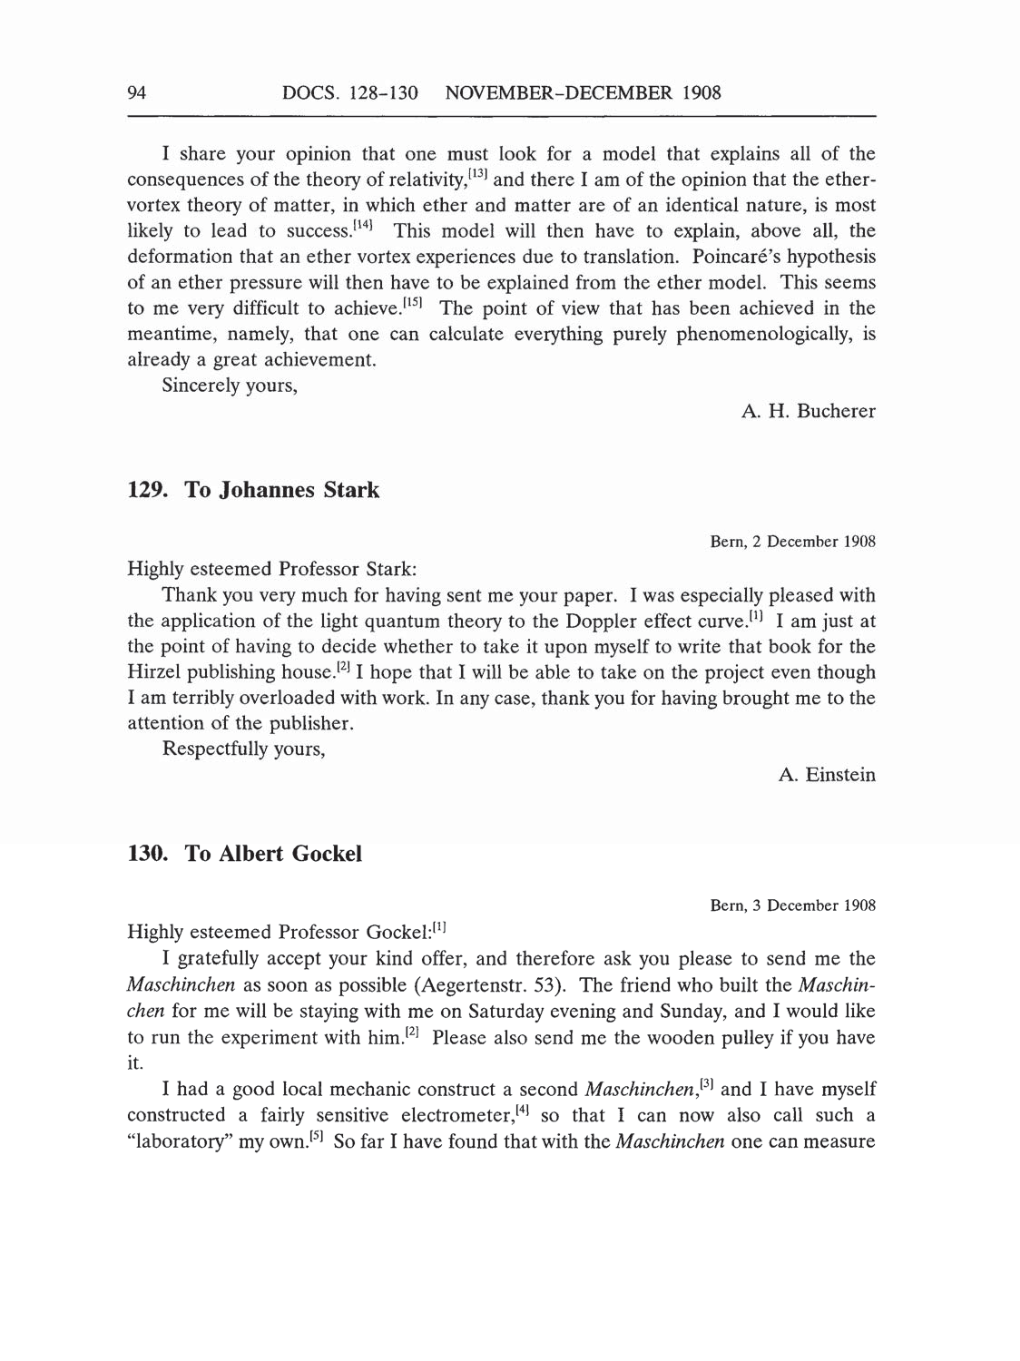 Volume 5: The Swiss Years: Correspondence, 1902-1914 (English translation supplement) page 94